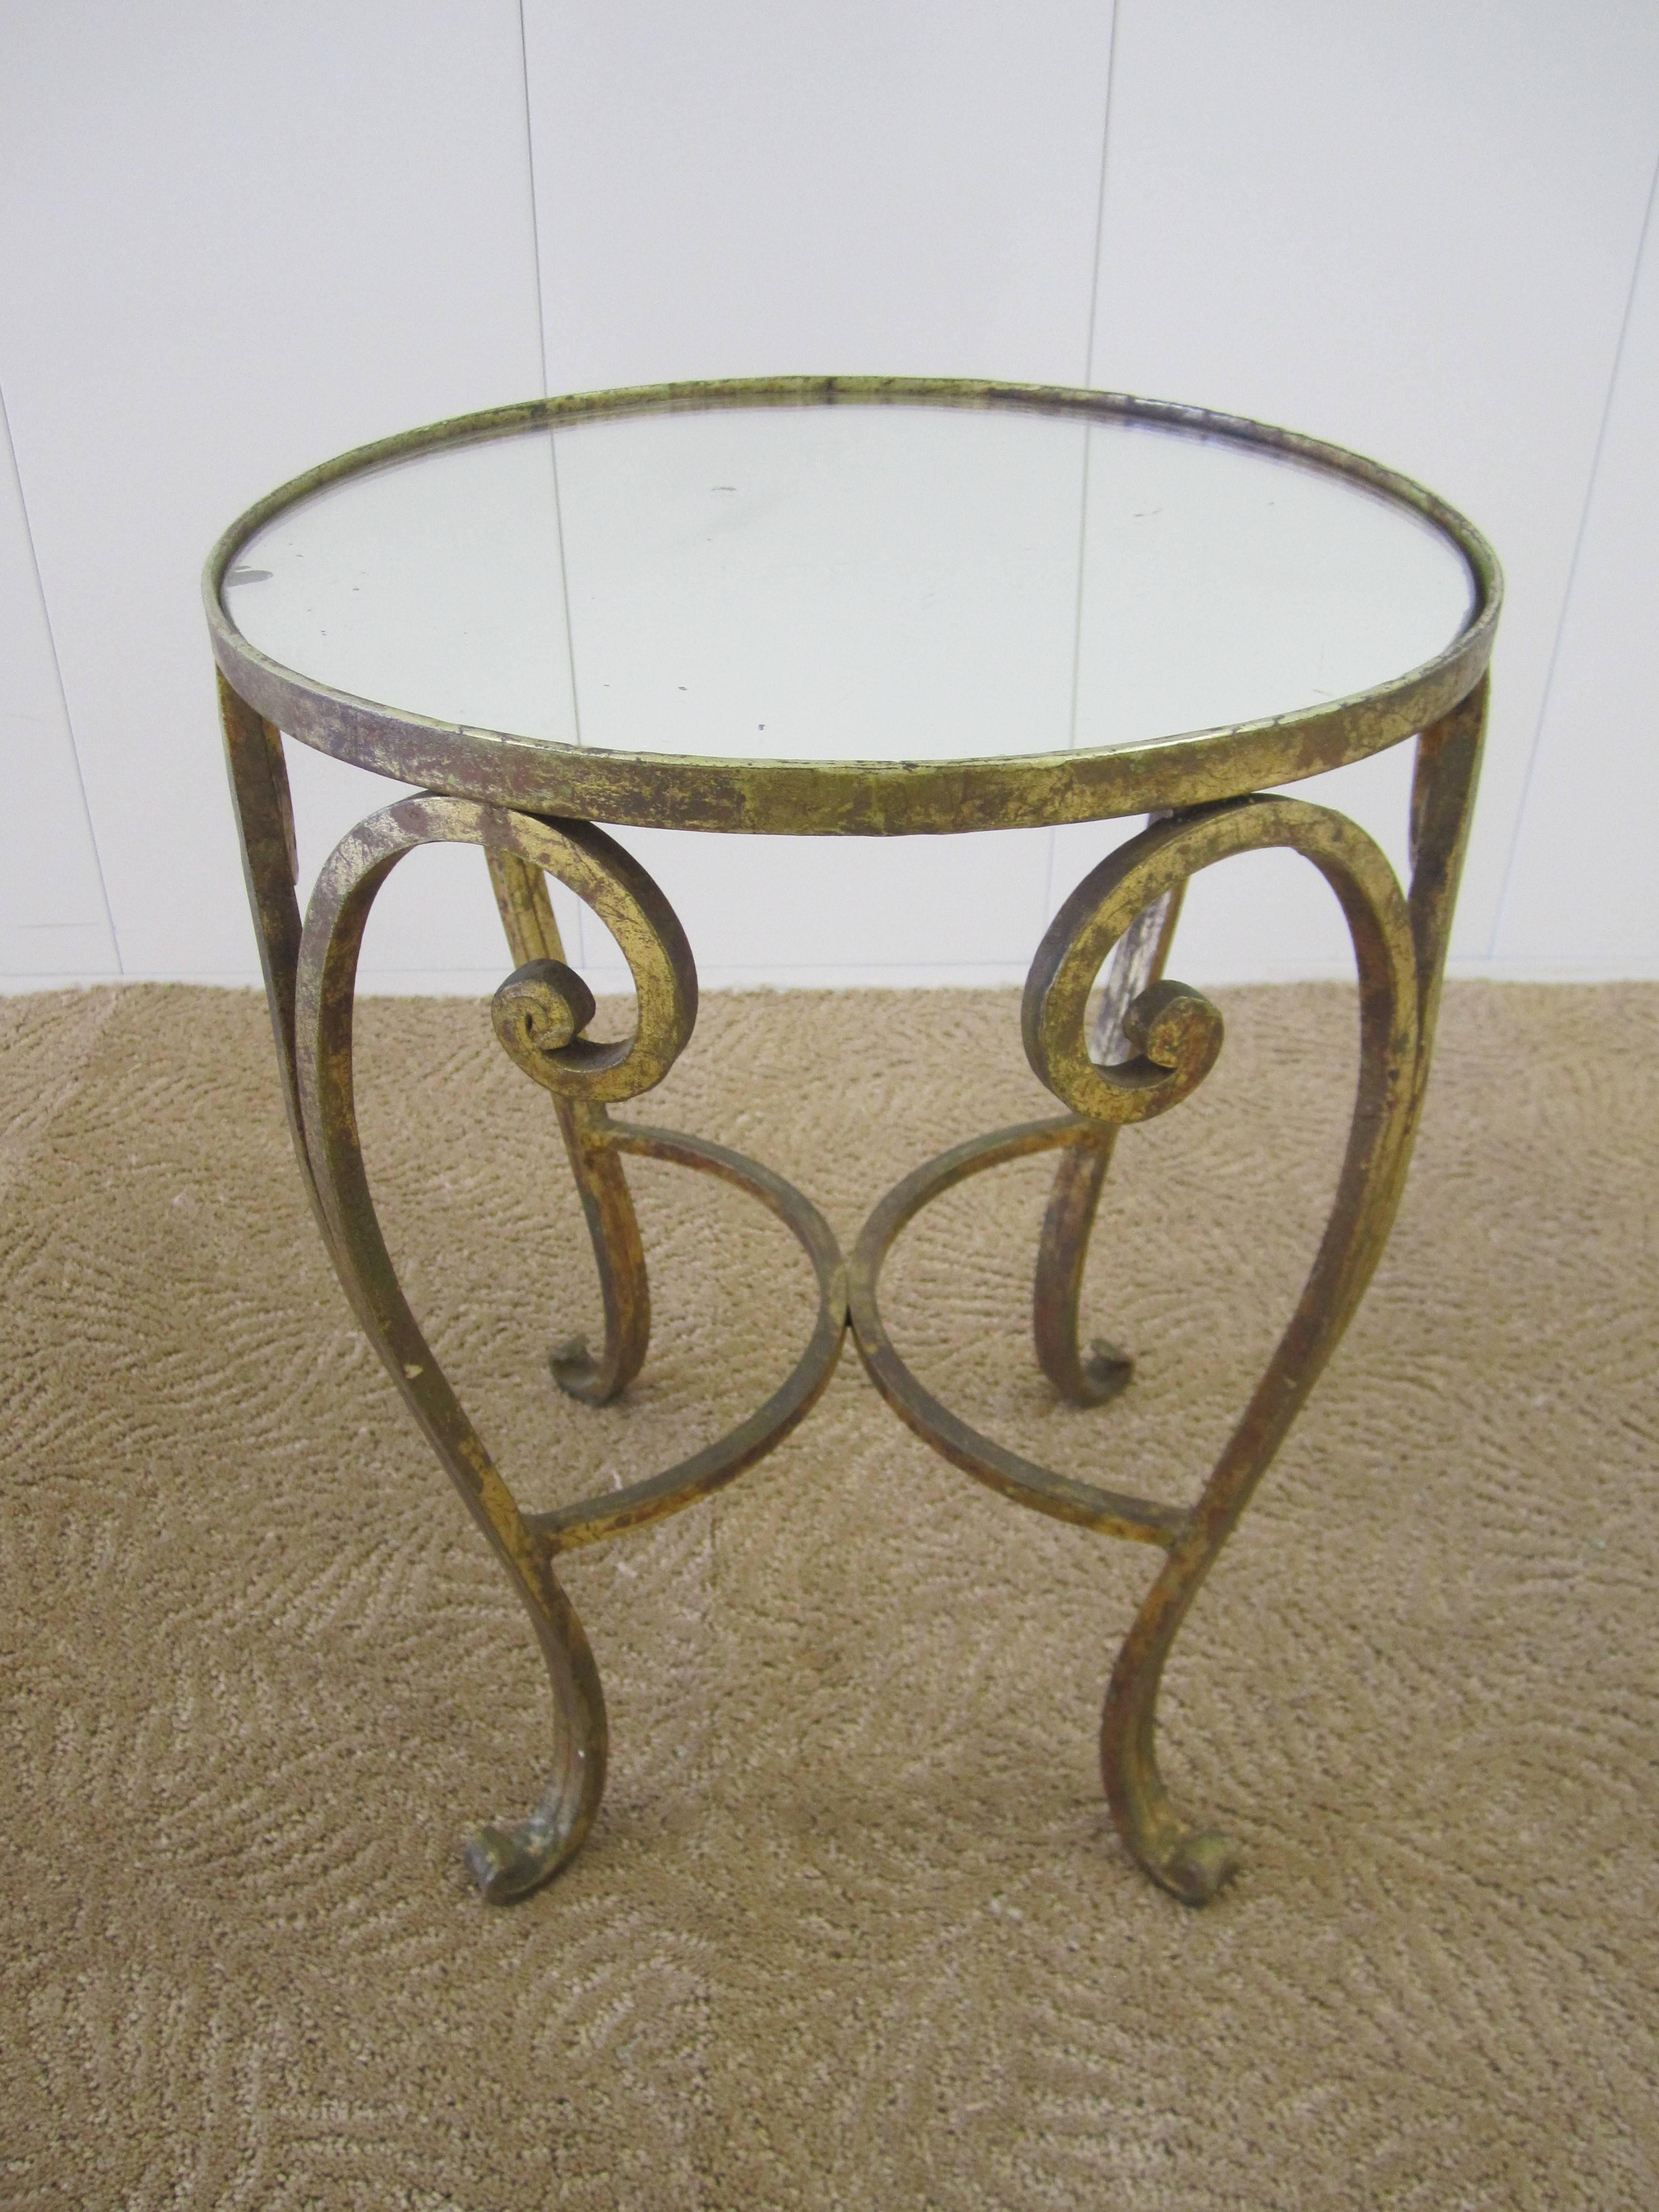 A small gold gilt oval side or drinks table with stretcher base and inset mirrored glass top, circa 20th century. The oval shape is a nice alternative to round. 

Table measures: 14 in. x 16.25 in. x 18 in. H

